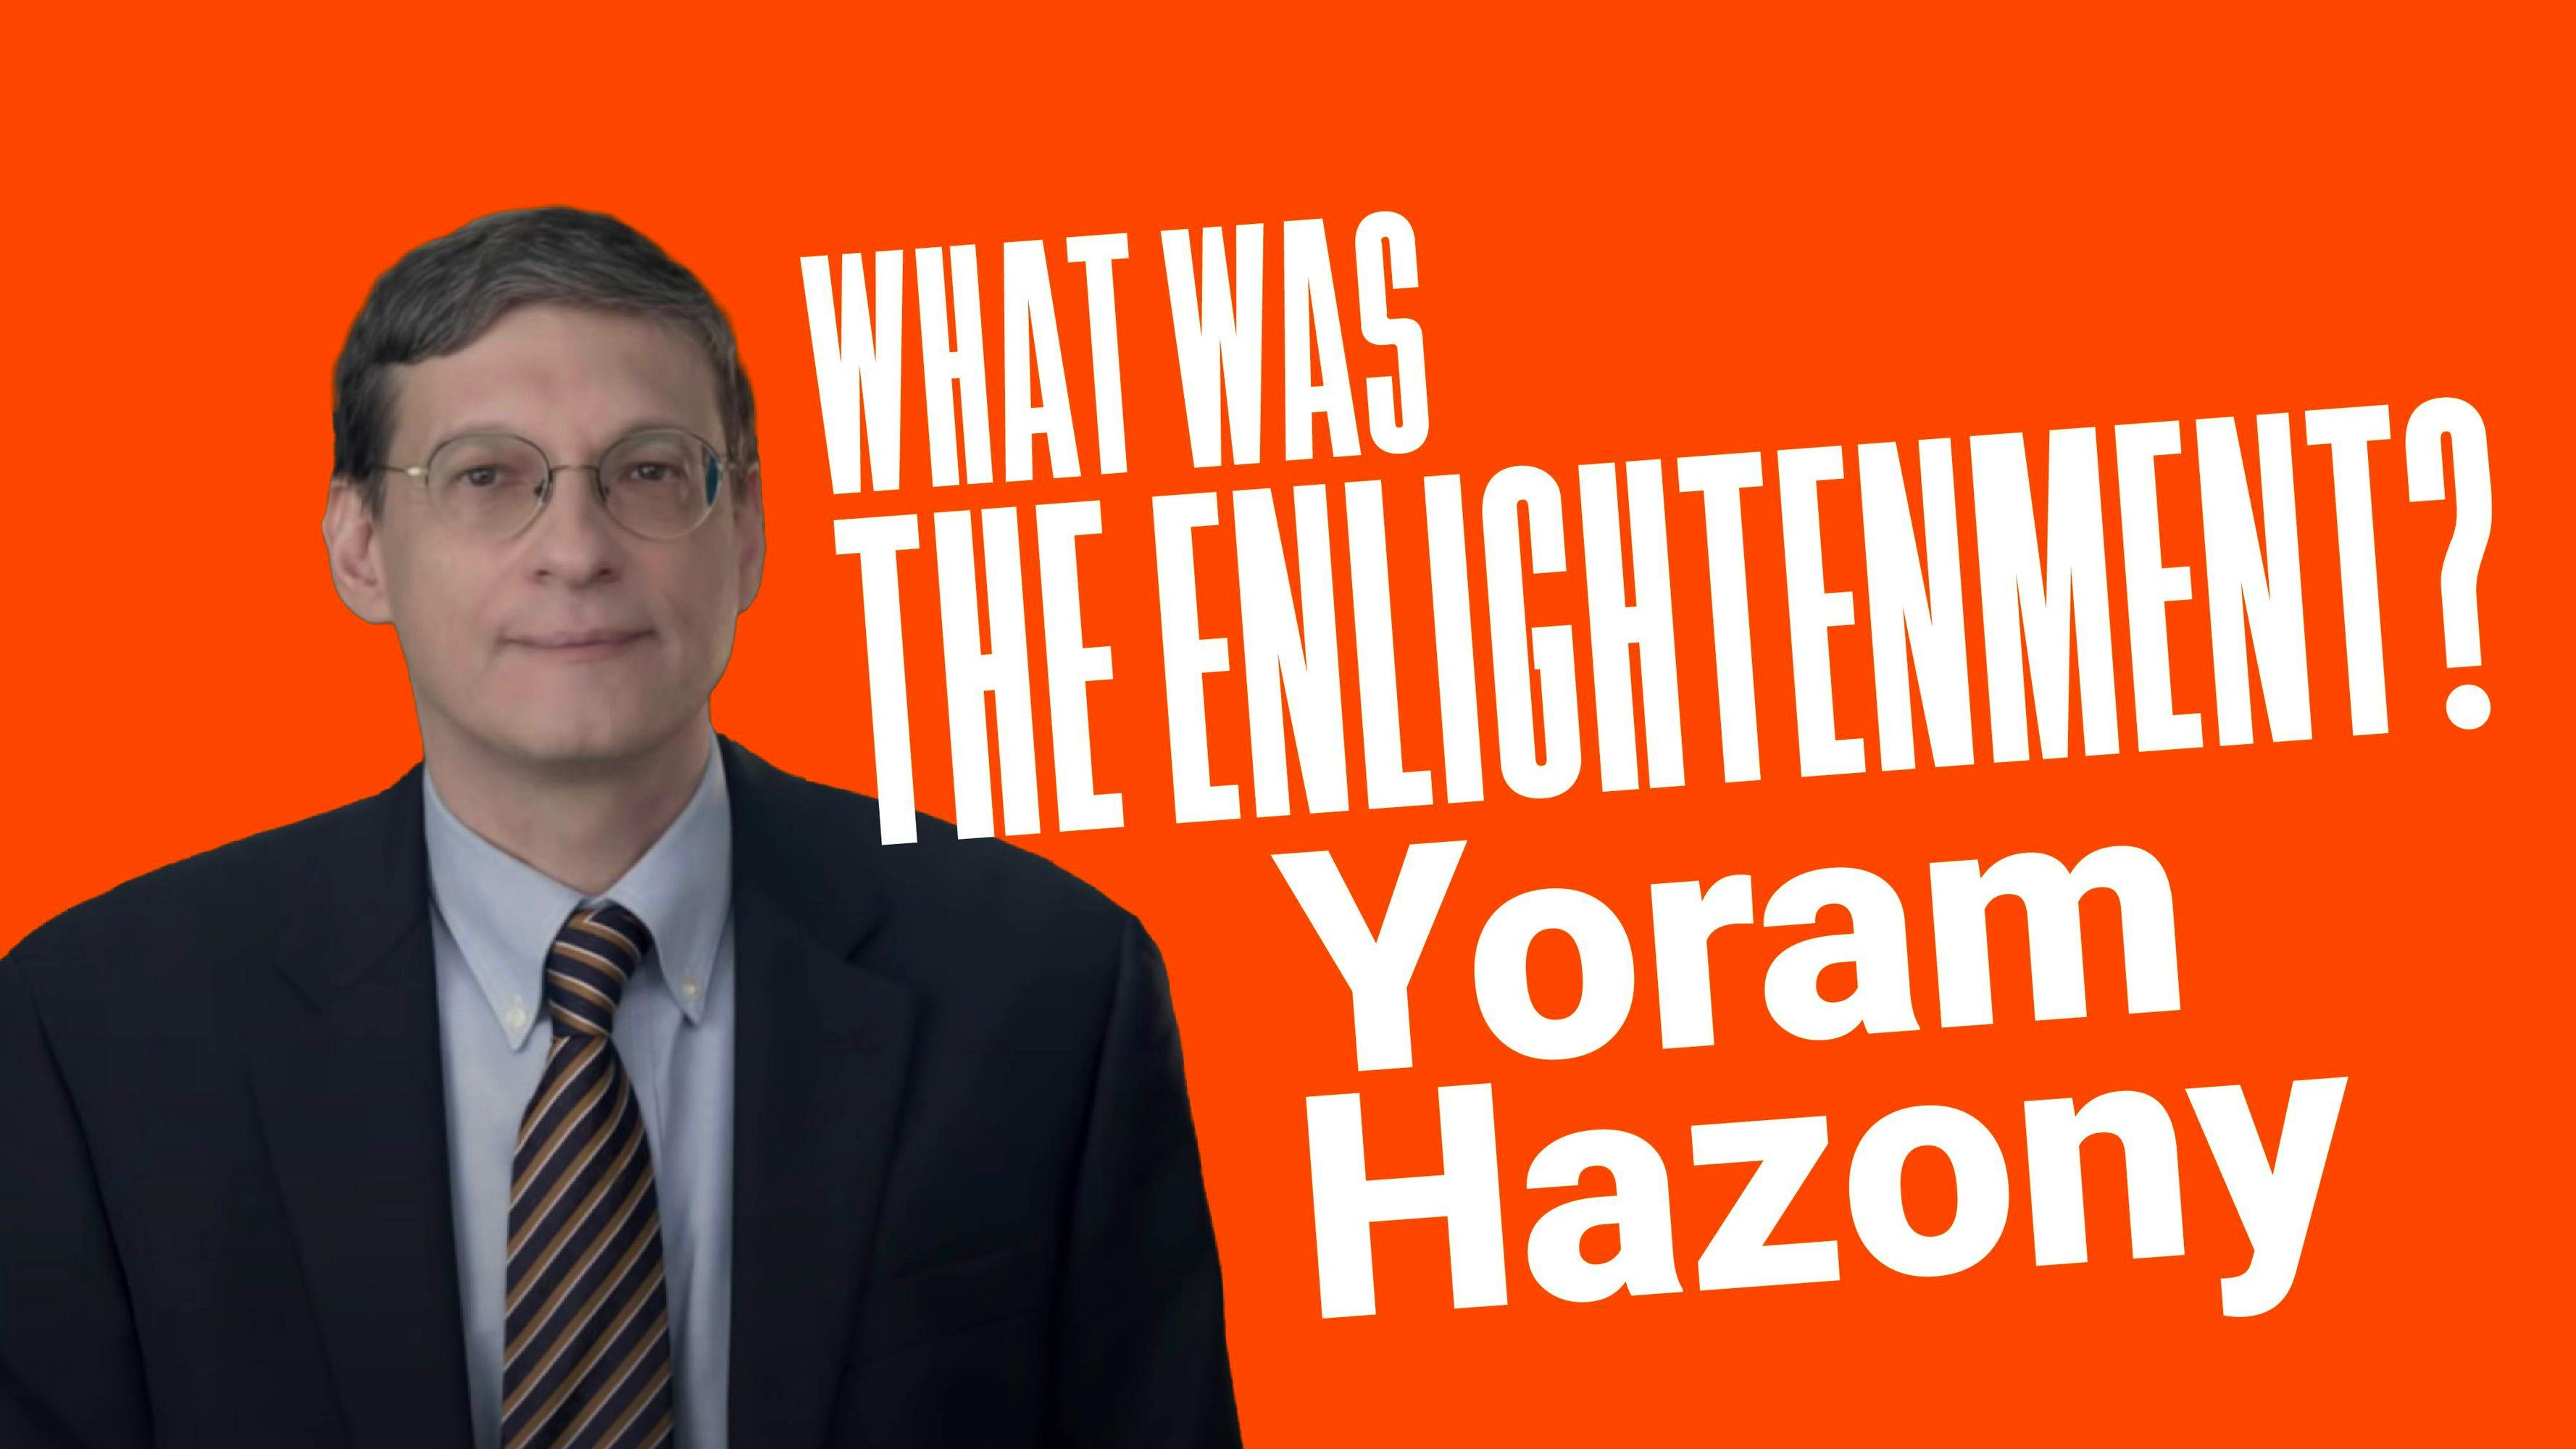 What Was the Enlightenment?